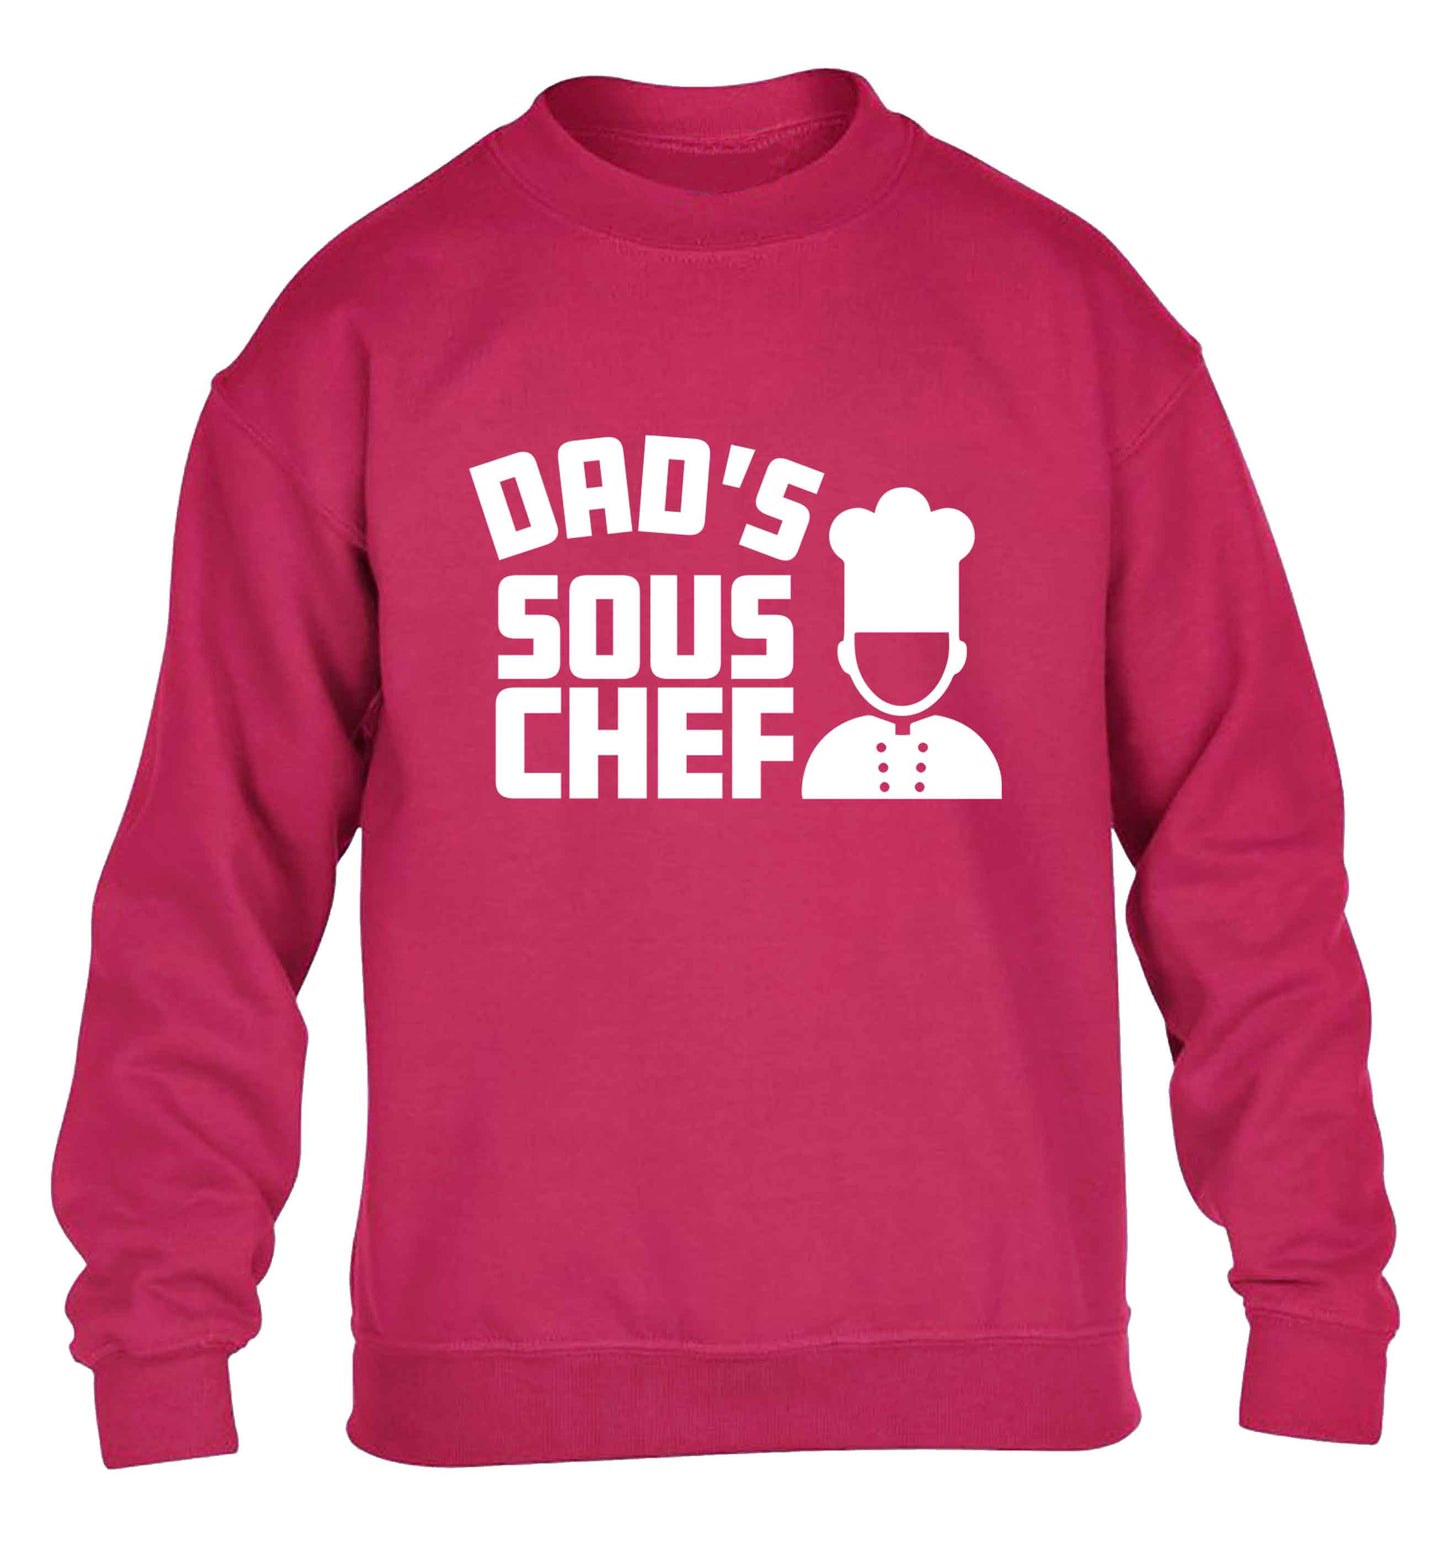 Dad's sous chef children's pink sweater 12-13 Years